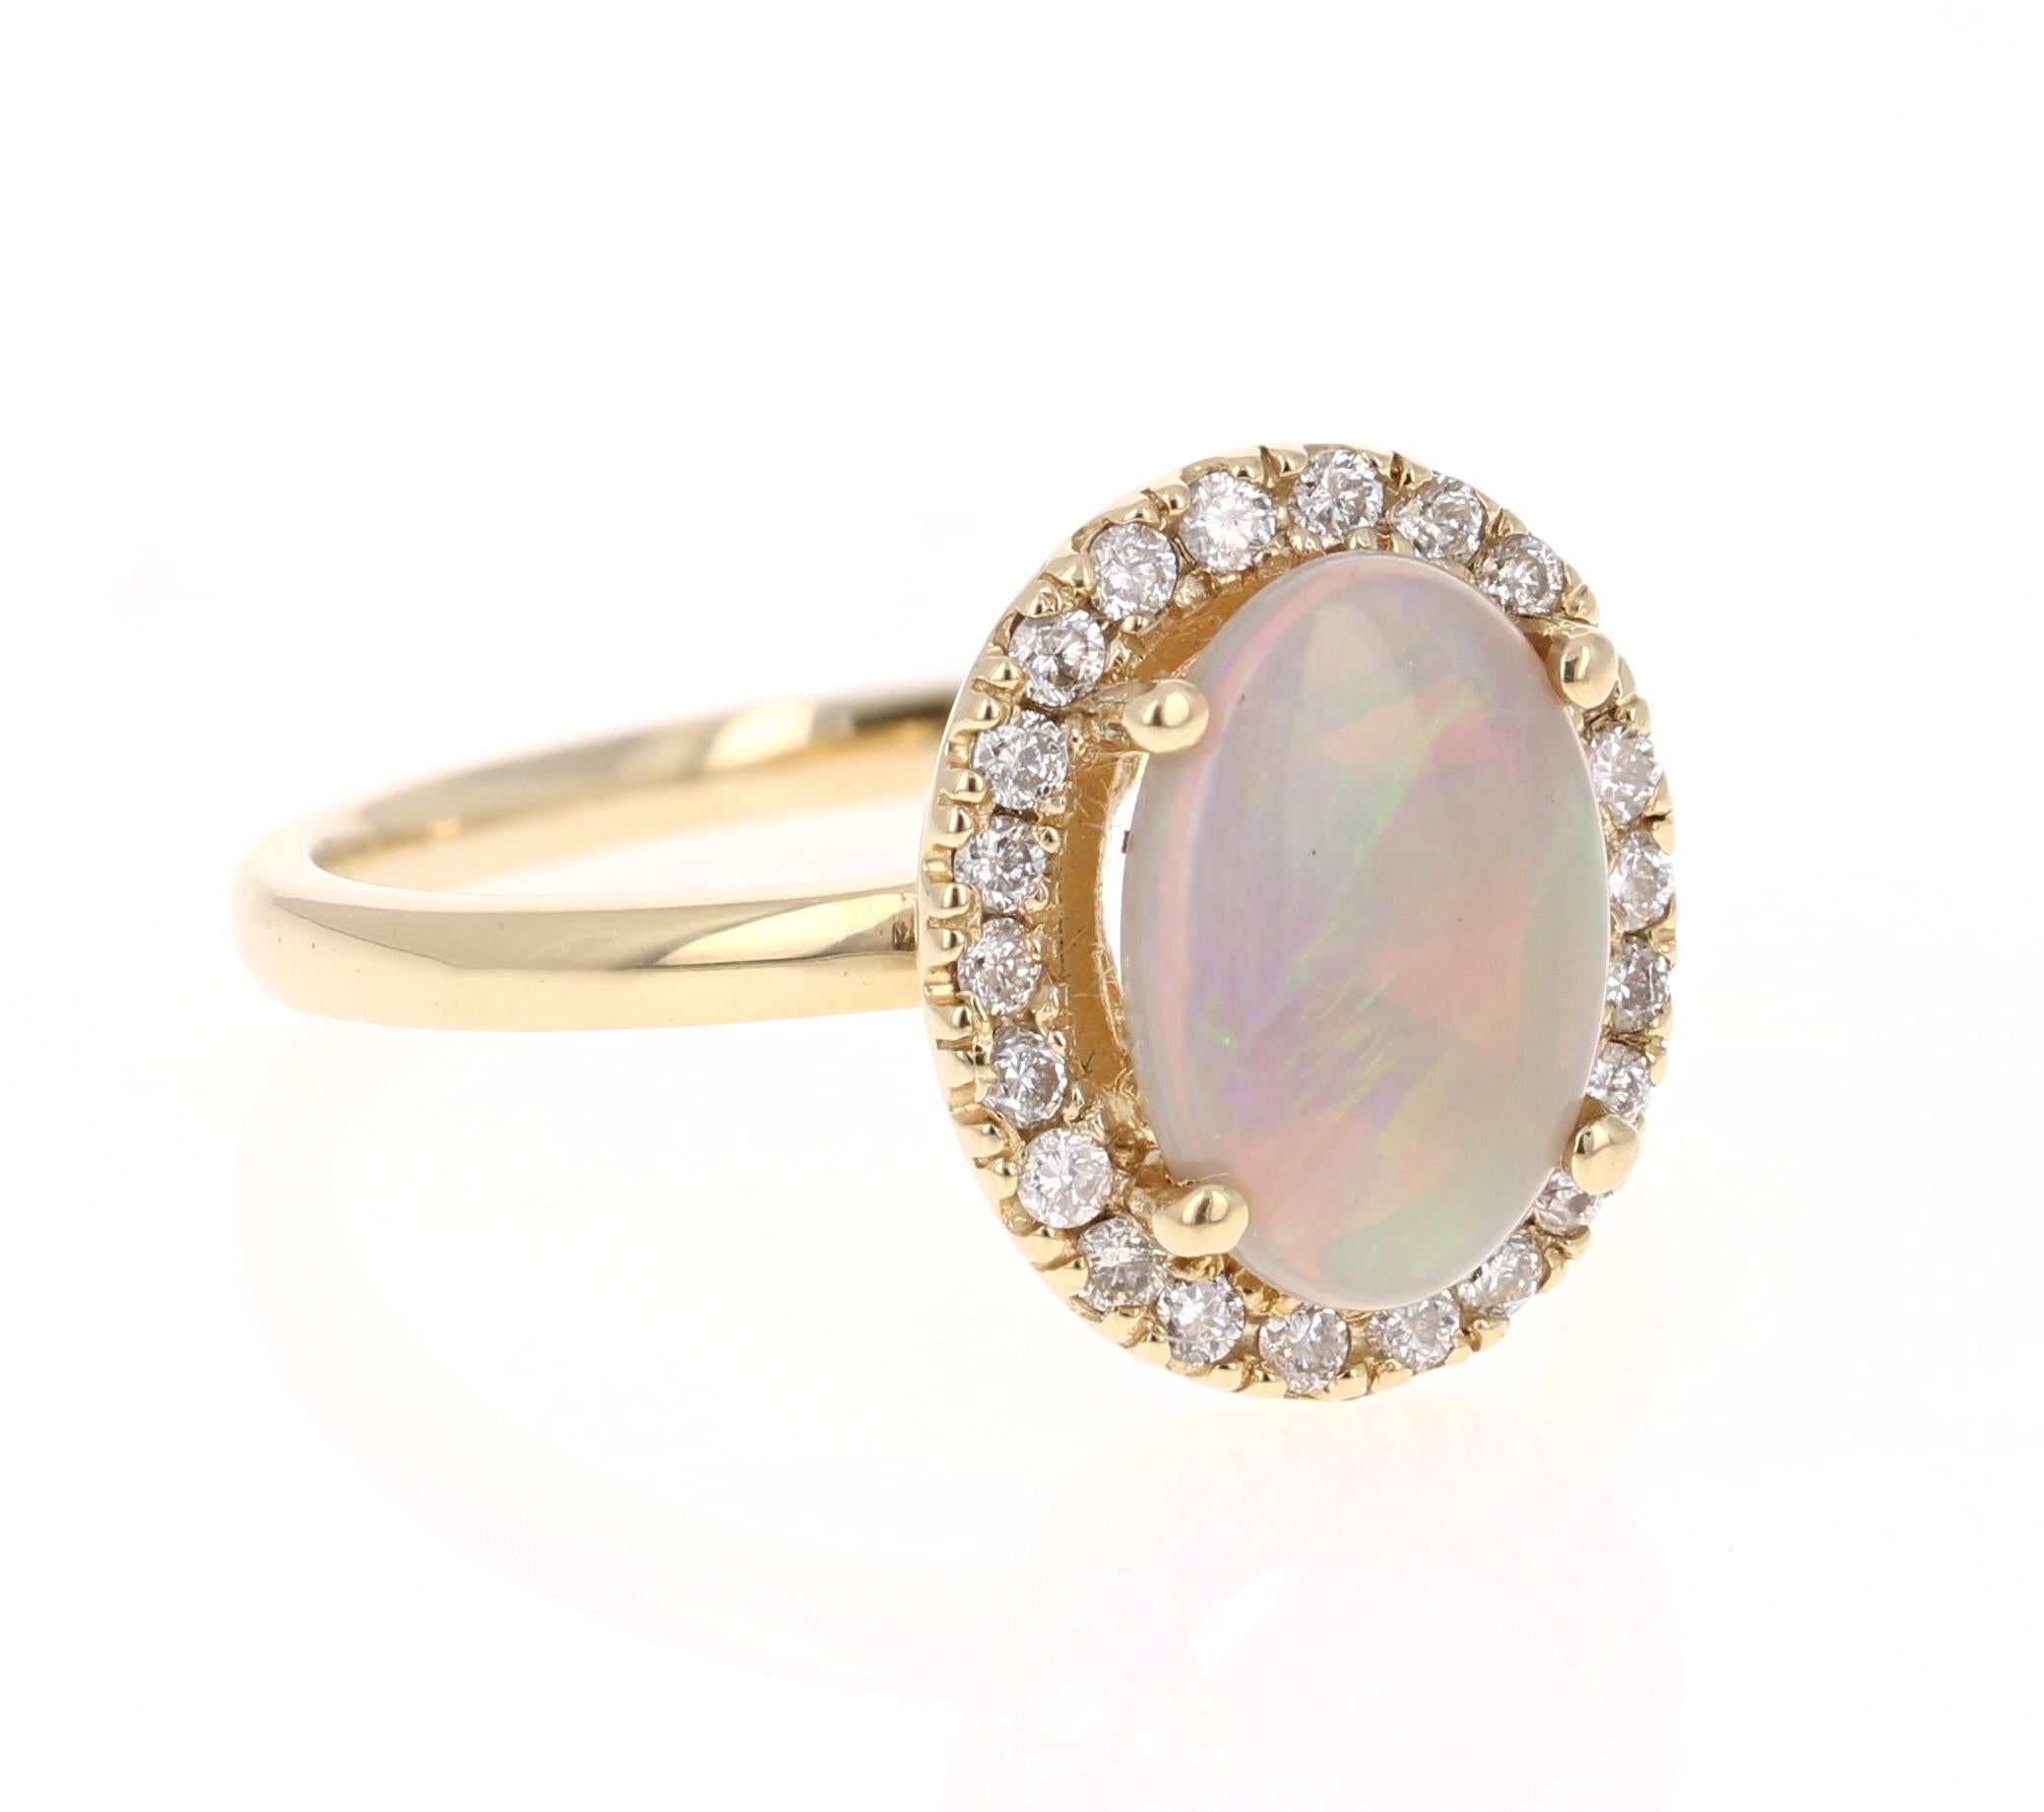 This ring has a cute and simple 1.03 Carat Opal and has 22 Round Cut Diamonds that weigh 0.25 Carats. The total carat weight of the ring is 1.28 Carats. 

The Opal displays beautiful flashes of green, yellow, and orange and has its origins from